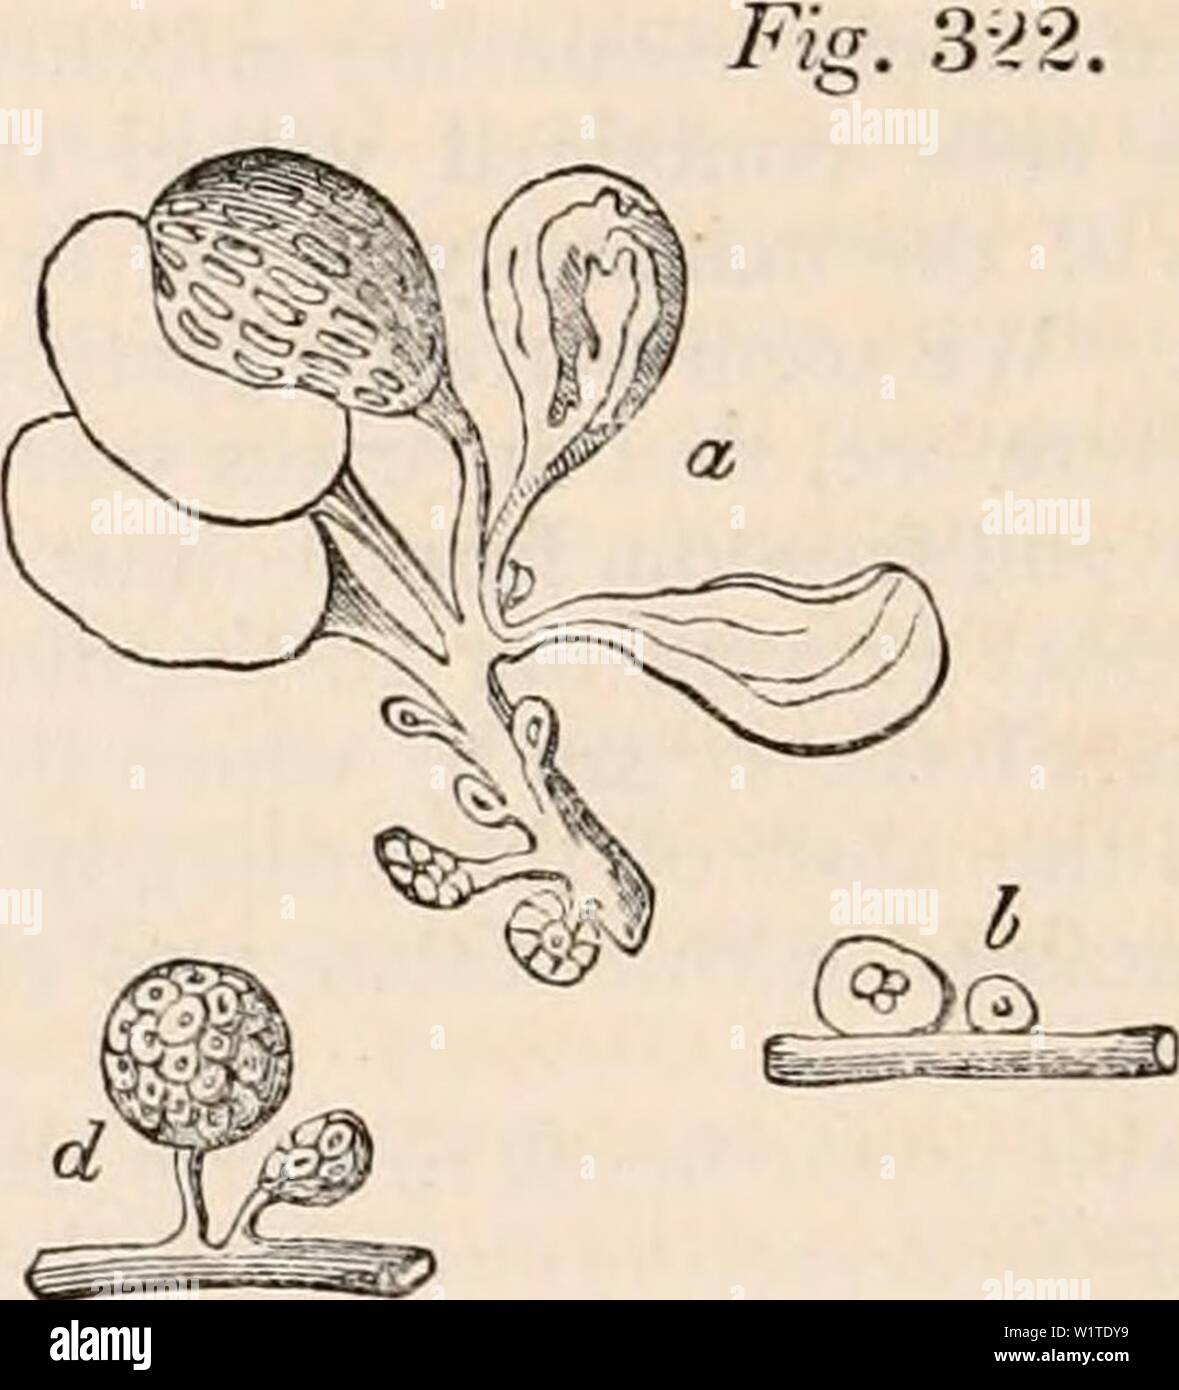 Archive image from page 475 of The cyclopædia of anatomy and. The cyclopædia of anatomy and physiology  cyclopdiaofana0401todd Year: 1847 Progressive development of vesicles of testis of Squalus cornubicus. a, portion of duct with a few nucleated cells, the primary or germinal cells of the future acini, at- tached to its walls ; b, c, d, e, f, primary cells, or acini, in successive stages ; g, one of the secondary cells in an immature state; h, a secondary cell elongated into a cylinder, each cell of its com- posite nucleus elongated into a spiral ; i, k, the spiral cells or spermatozoa free. Stock Photo